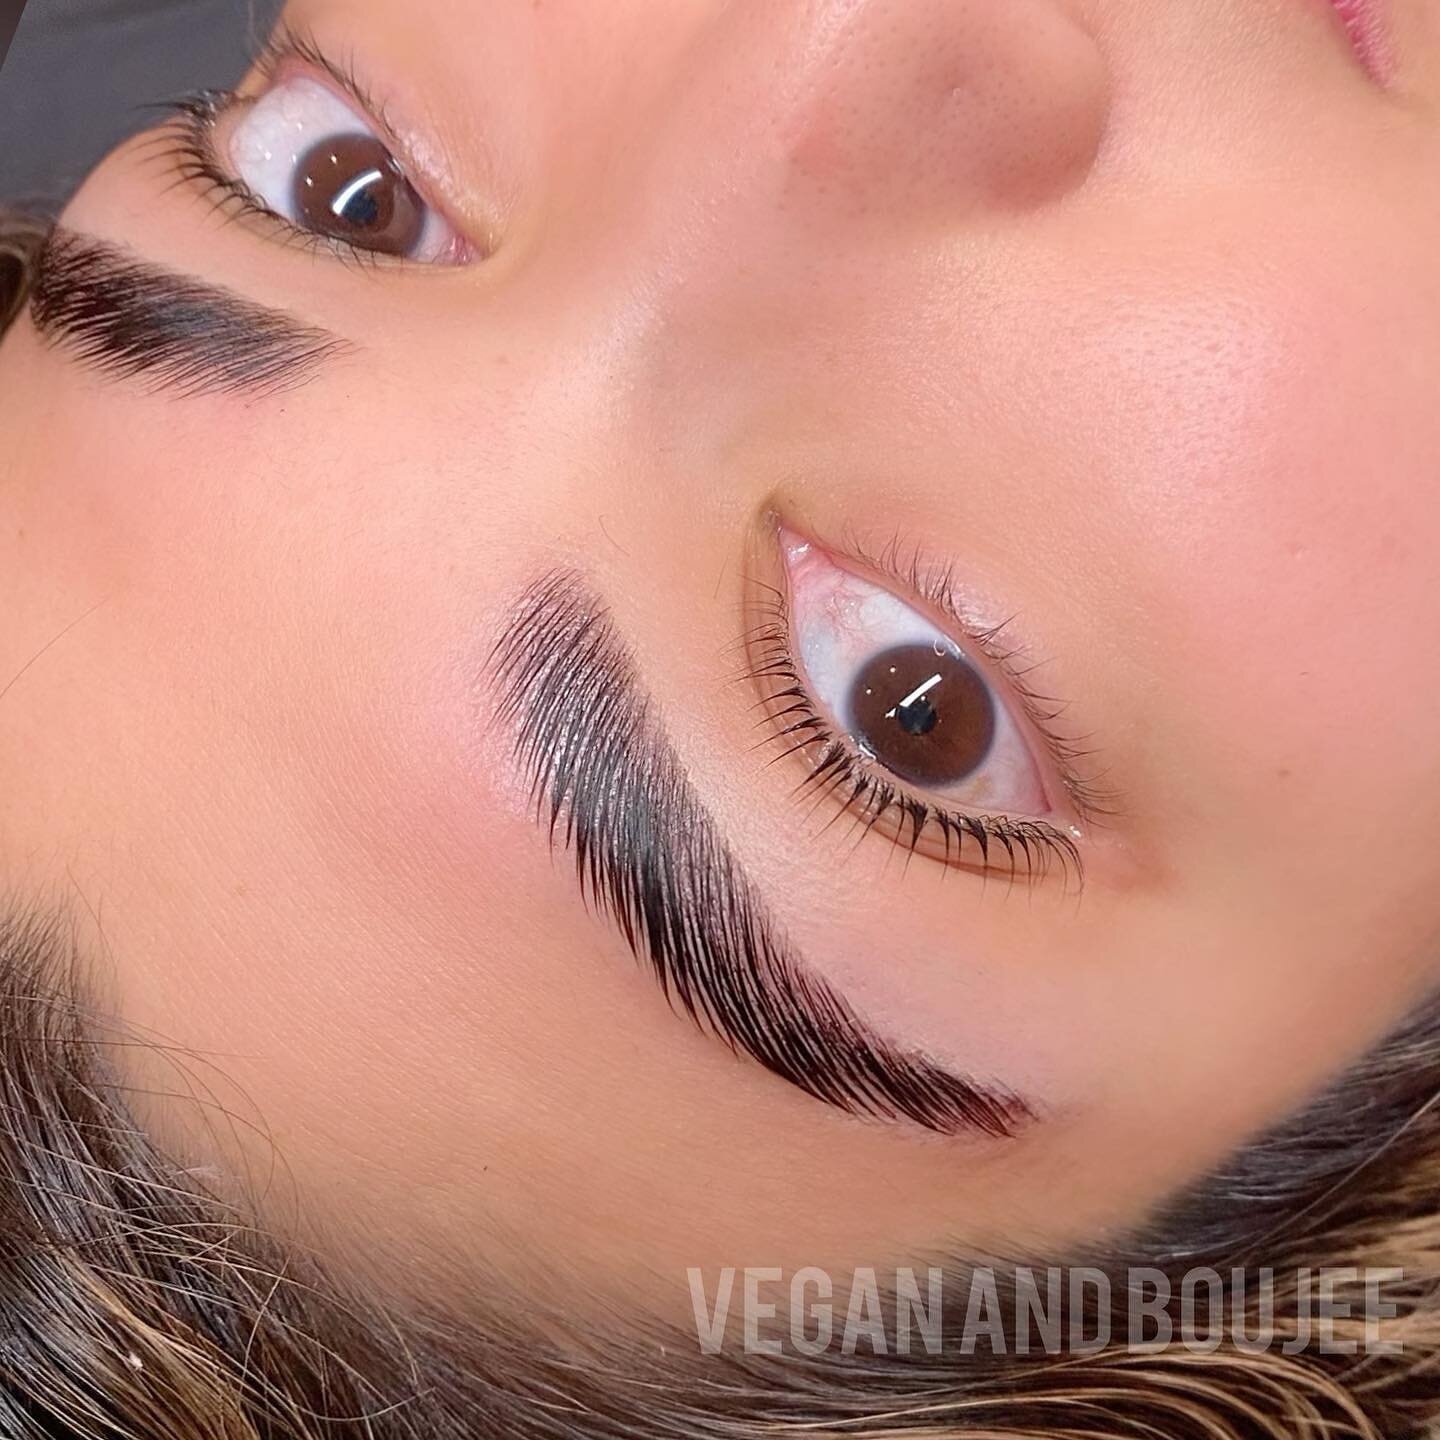 Brow lami Lash lift combo + tints🤩
All products used are vegan and cruelty free🐰🍃
Lifted using my VB Italian made solutions. Gentle and nourishing for the lash and brow hairs🥰
.
Link in bio to book treatment and trainings 🤓&hearts;️
.
.
.
.
#bro